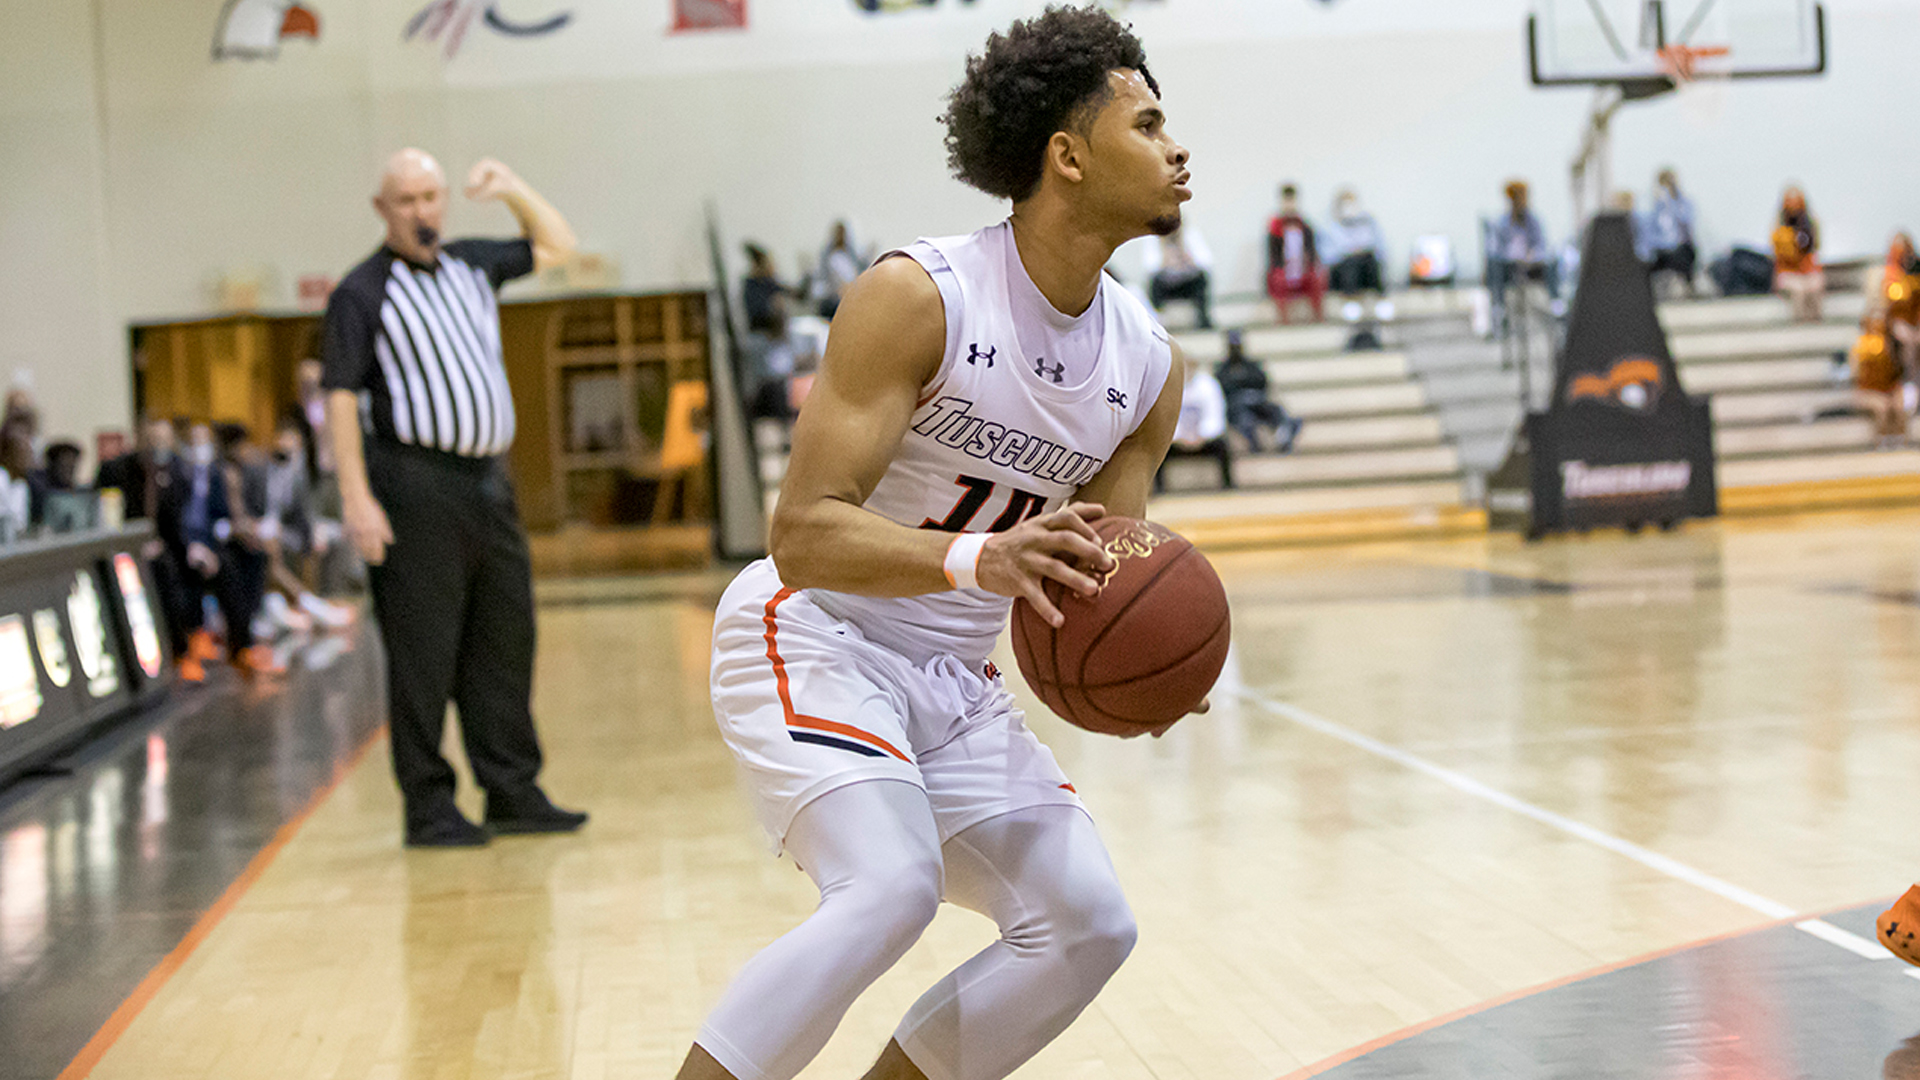 James West IV poured in 18 points off the bench in his last outing vs Mars Hill (photo by Chuck Williams)